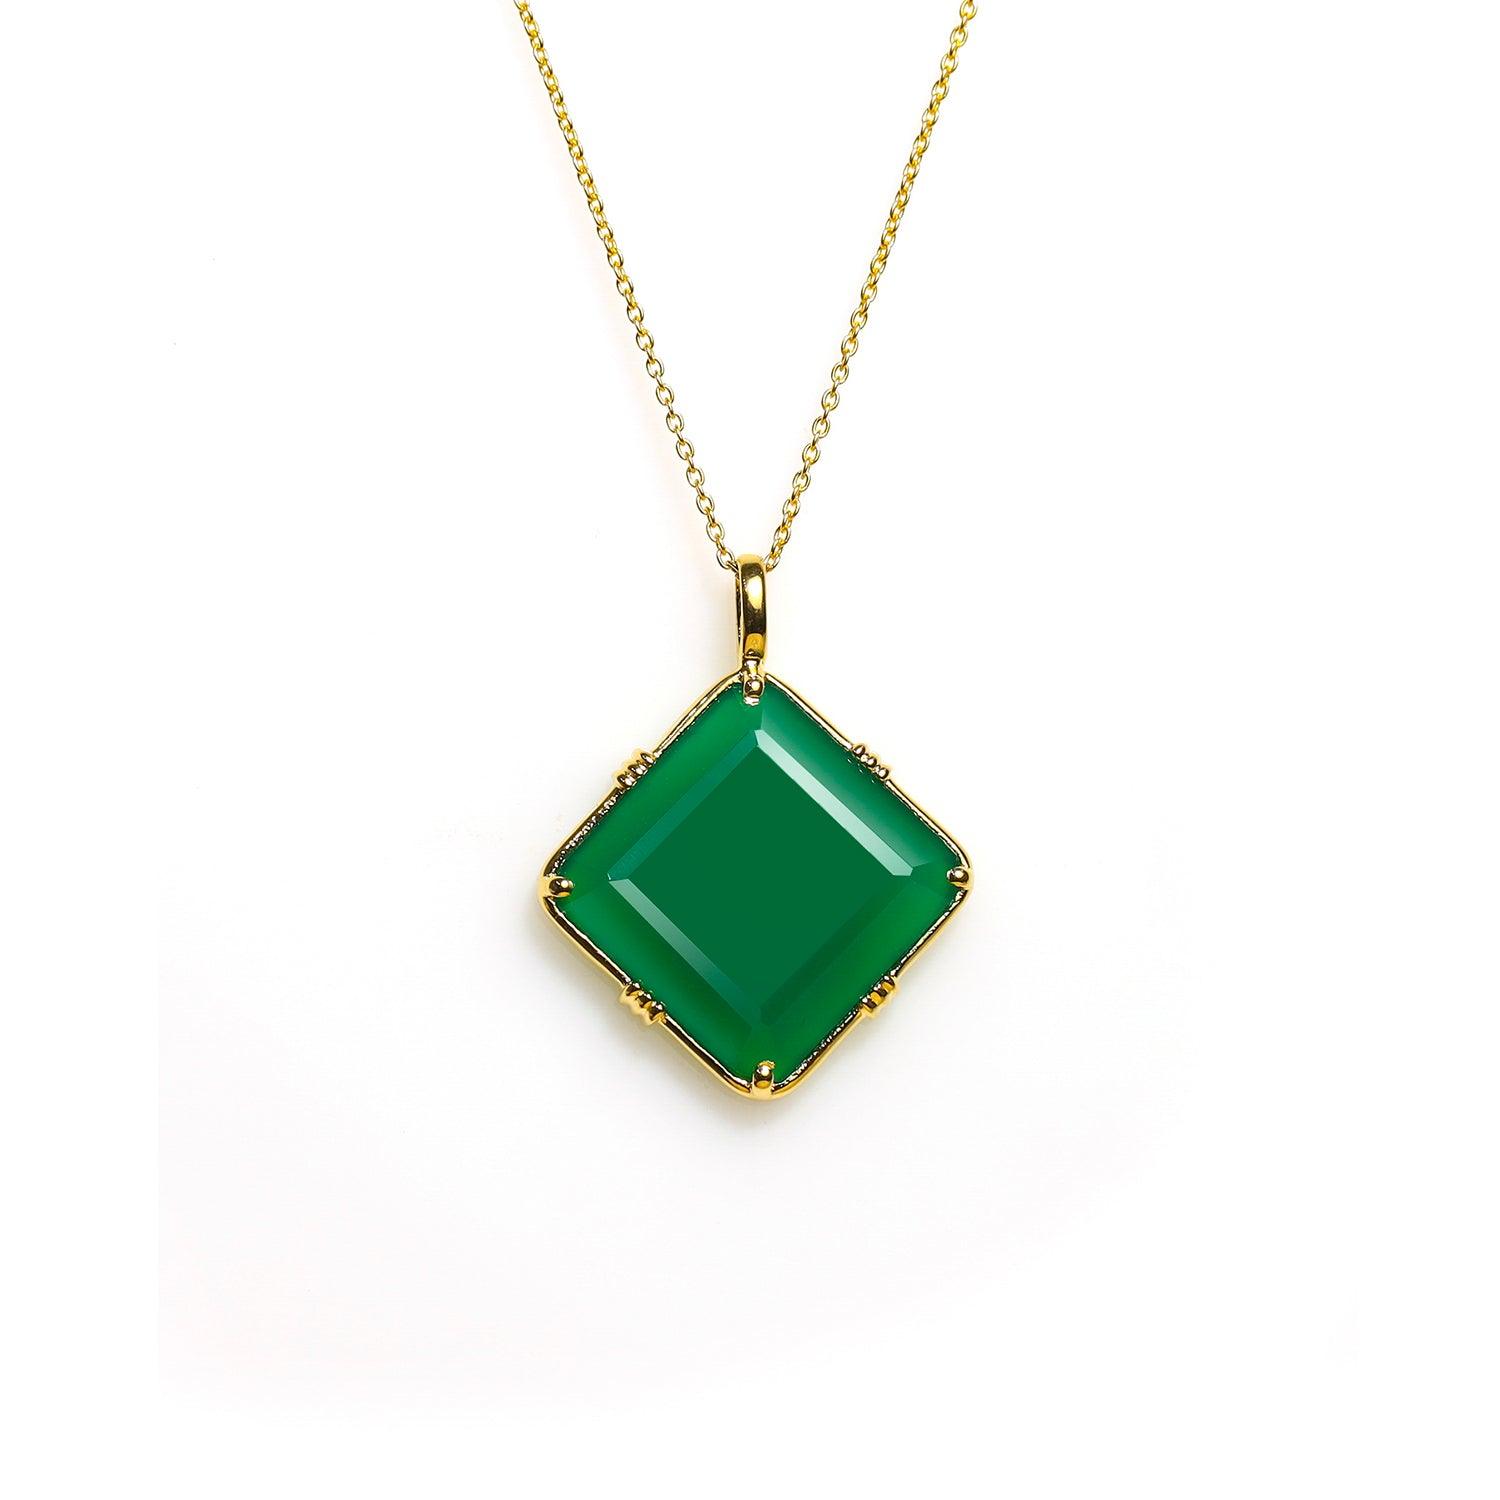 Green Onyx Chain Pendant Solid 14kt Gold Over 925 Silver Pendant Necklace Jewelry - YoTreasure